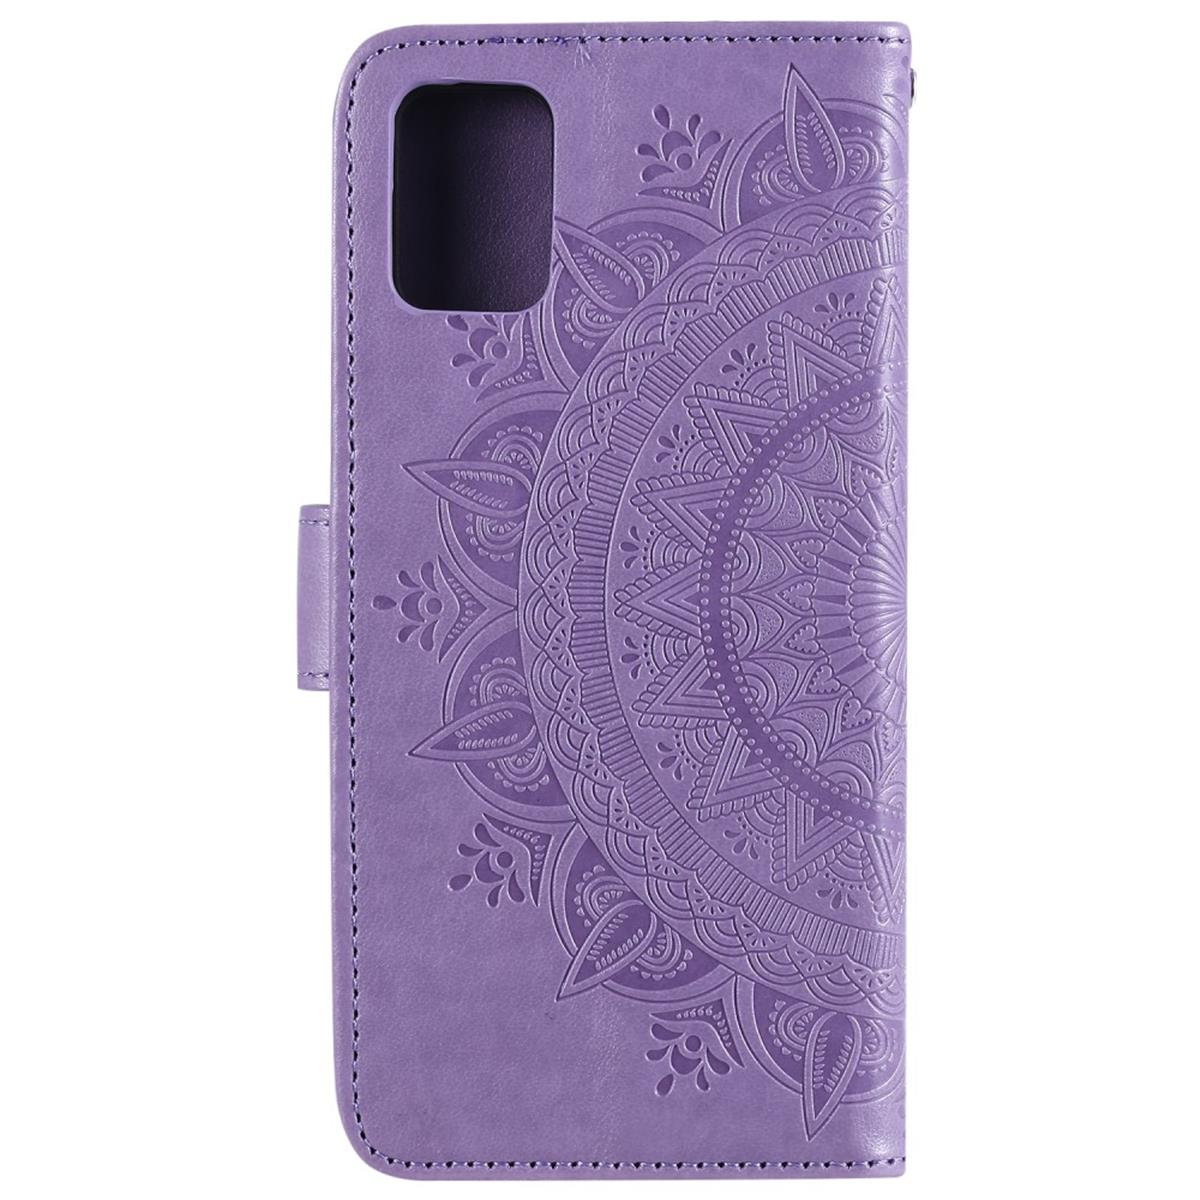 COVERKINGZ Klapphülle mit Mandala Muster, A31, Galaxy Samsung, Bookcover, Lila